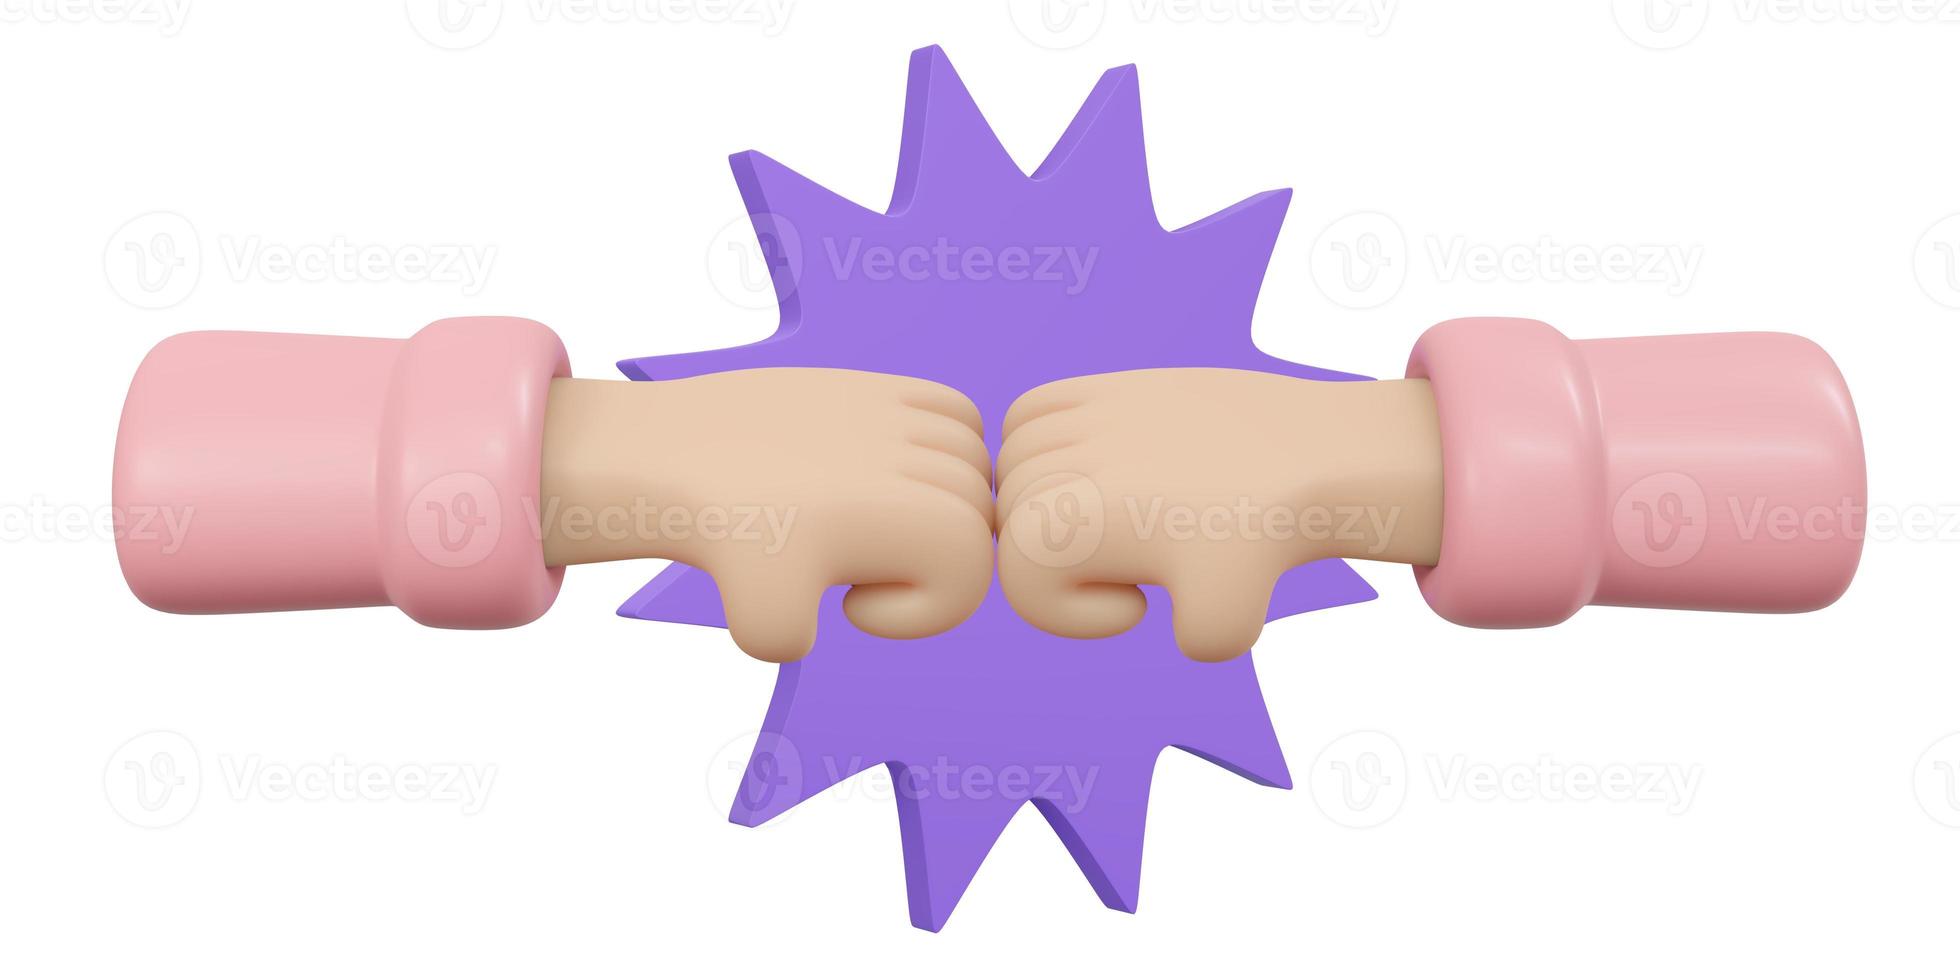 3D Rendering of hand bump sign isolate on white background. 3D Render illustration cartoon style. photo